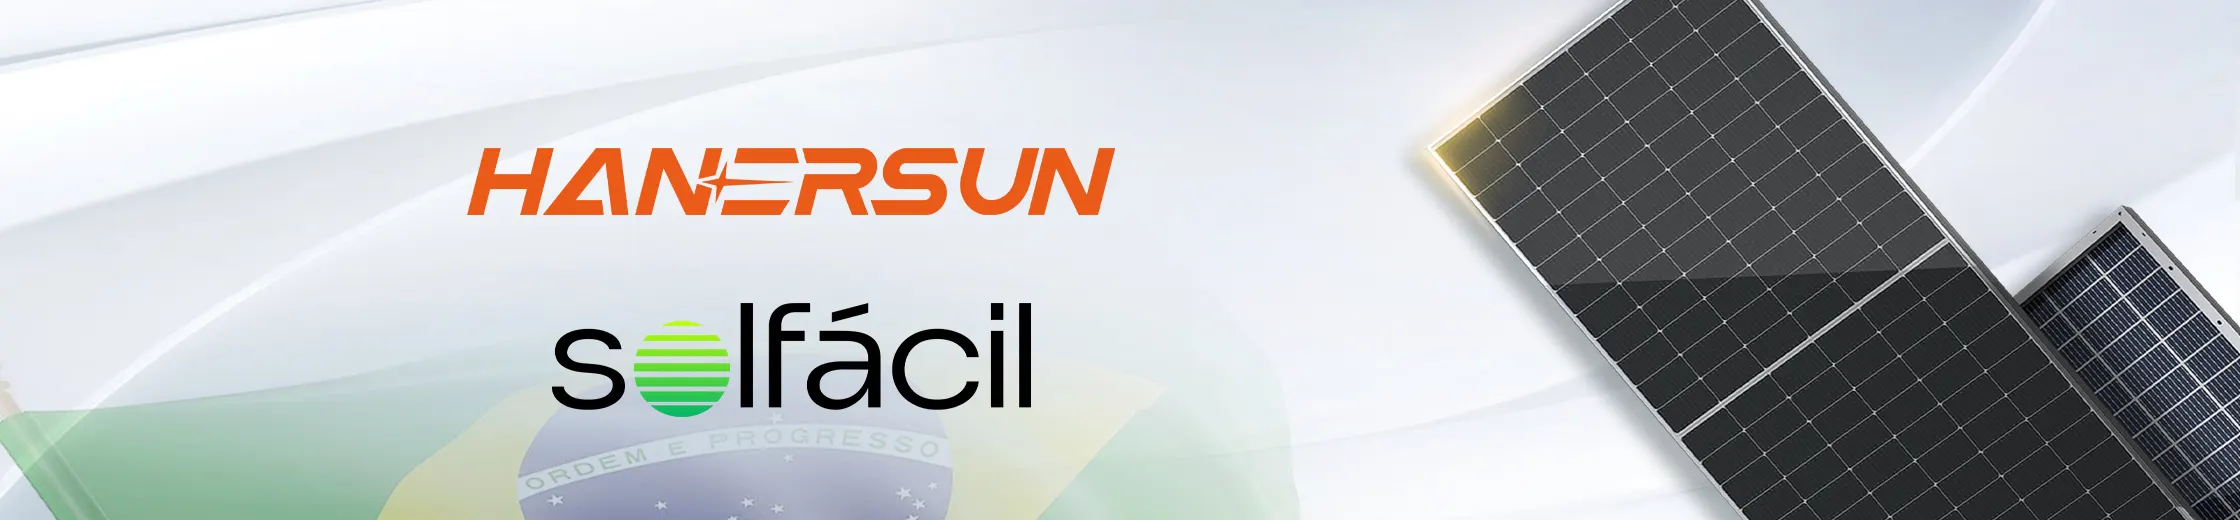 Hanersun Inked MoU with Solfácil to Supply 400MW of N Type PV Modules for Brazilian Distribution Generation Market